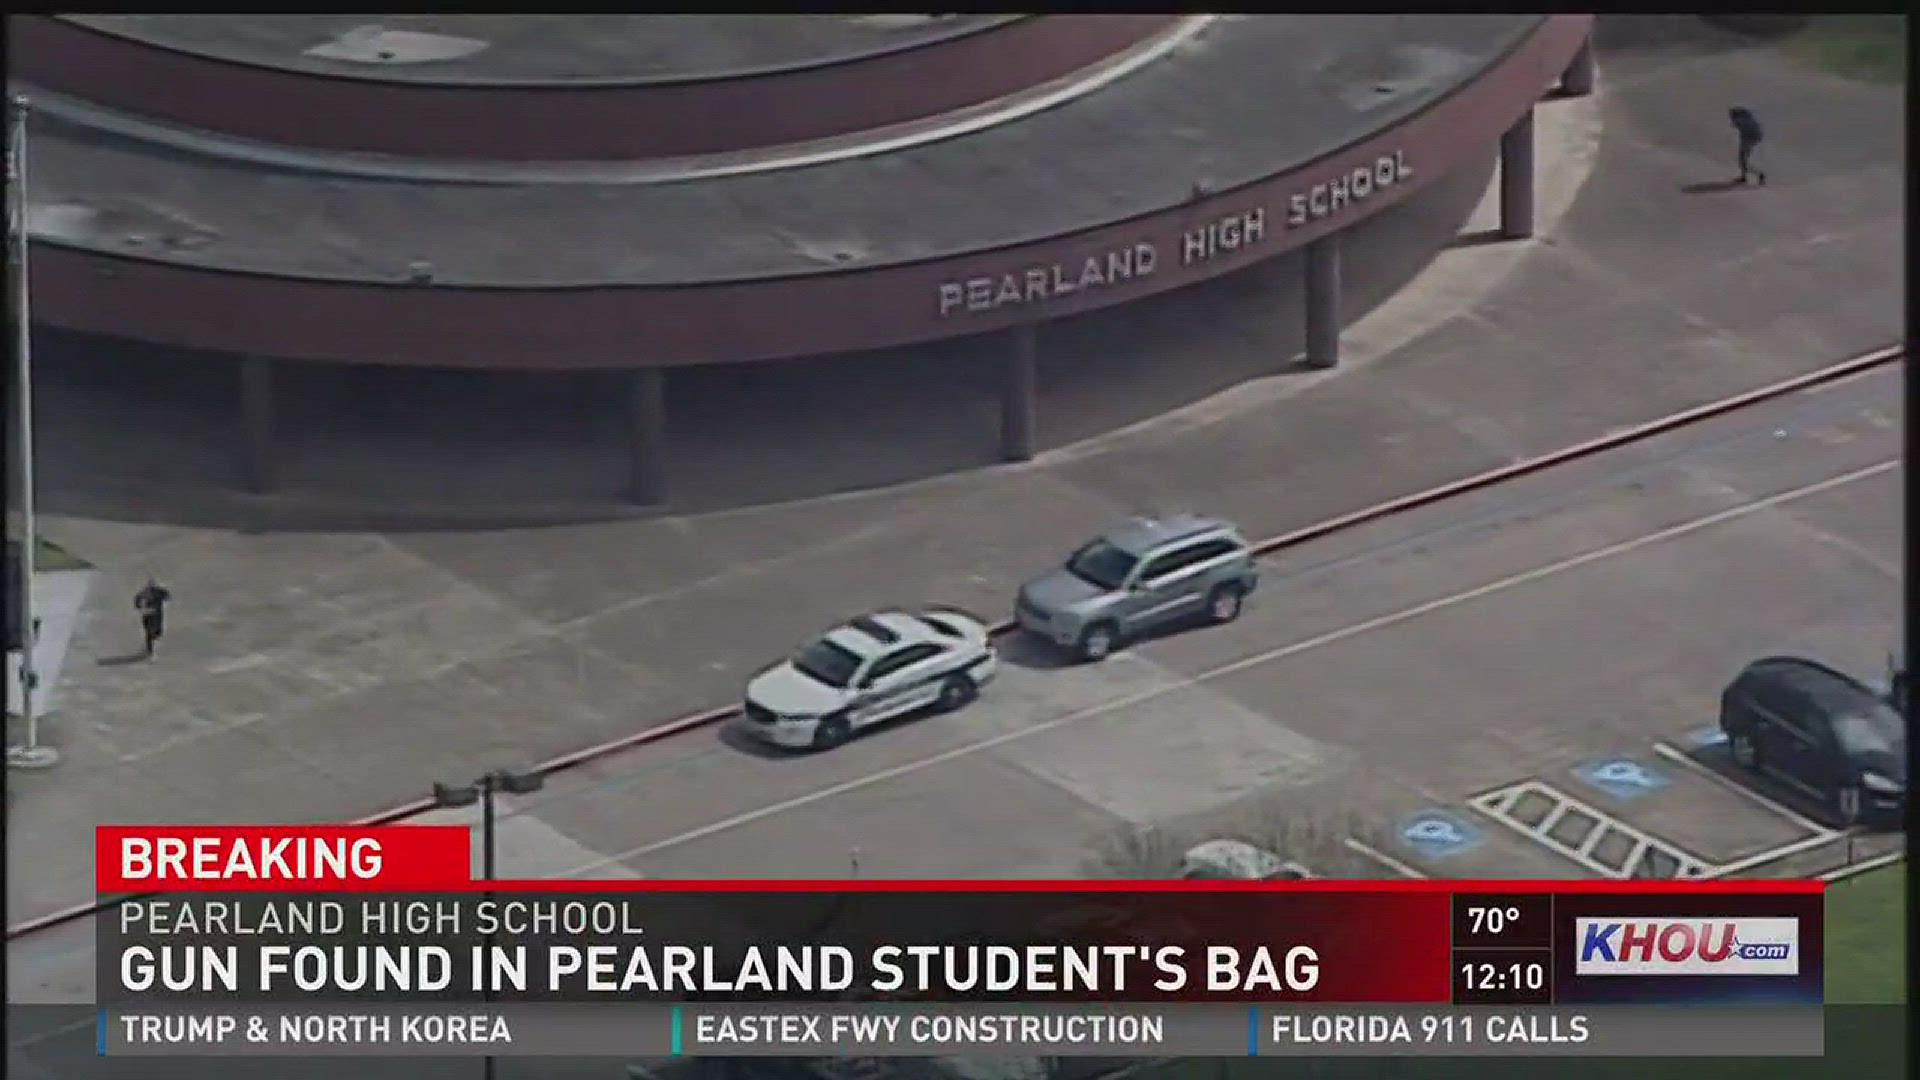 Police found a gun in student's bag at Pearland High School Friday morning, according to Pearland ISD.